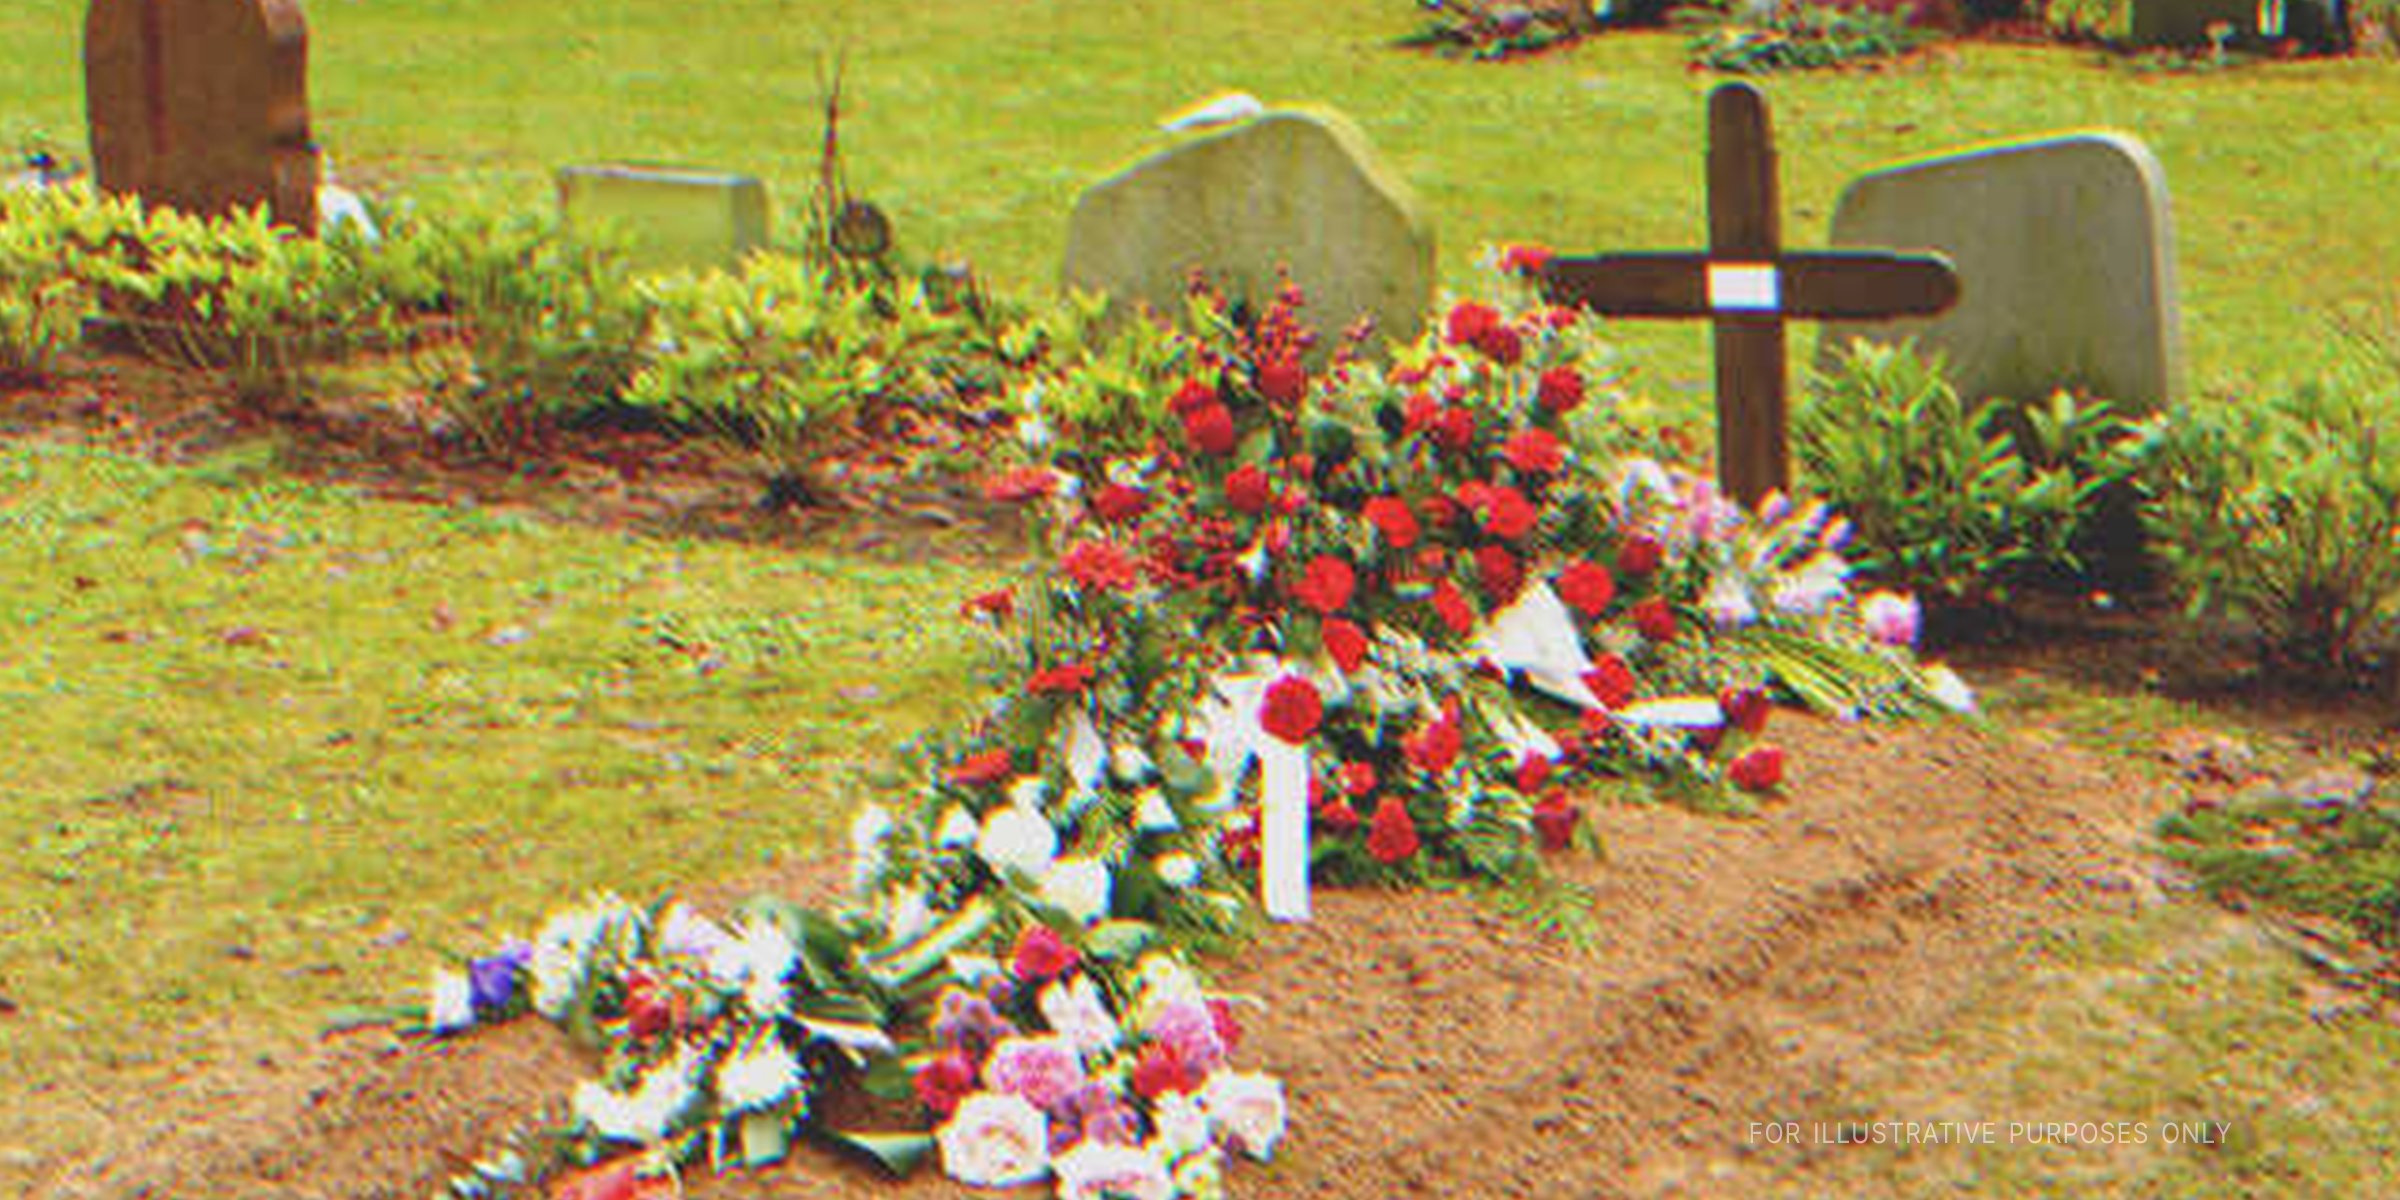 Flowers on a grave. | Source: Shutterstock